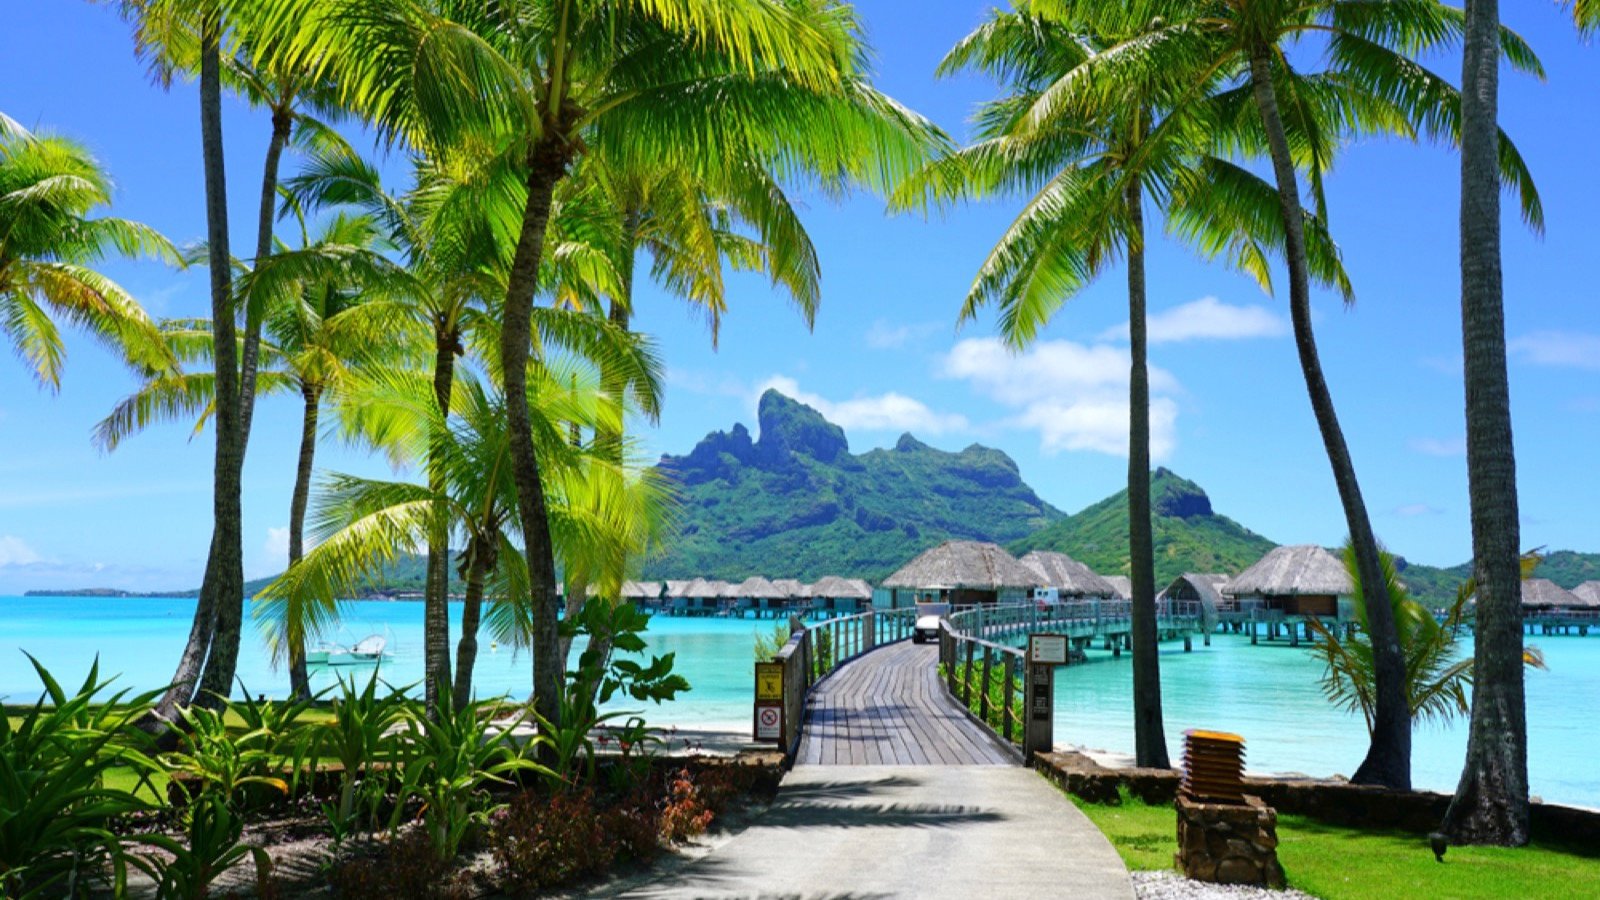 <p>For a romantic destination, head to Bora Bora. Stay in a private, dreamy, overwater bungalow built on stilts overlooking a crystal clear lagoon. It’s the perfect location to renew your vows, celebrate your retirement, or reignite the passion of your younger years. Bora Bora is a luxury trip, but you deserve something special.</p>